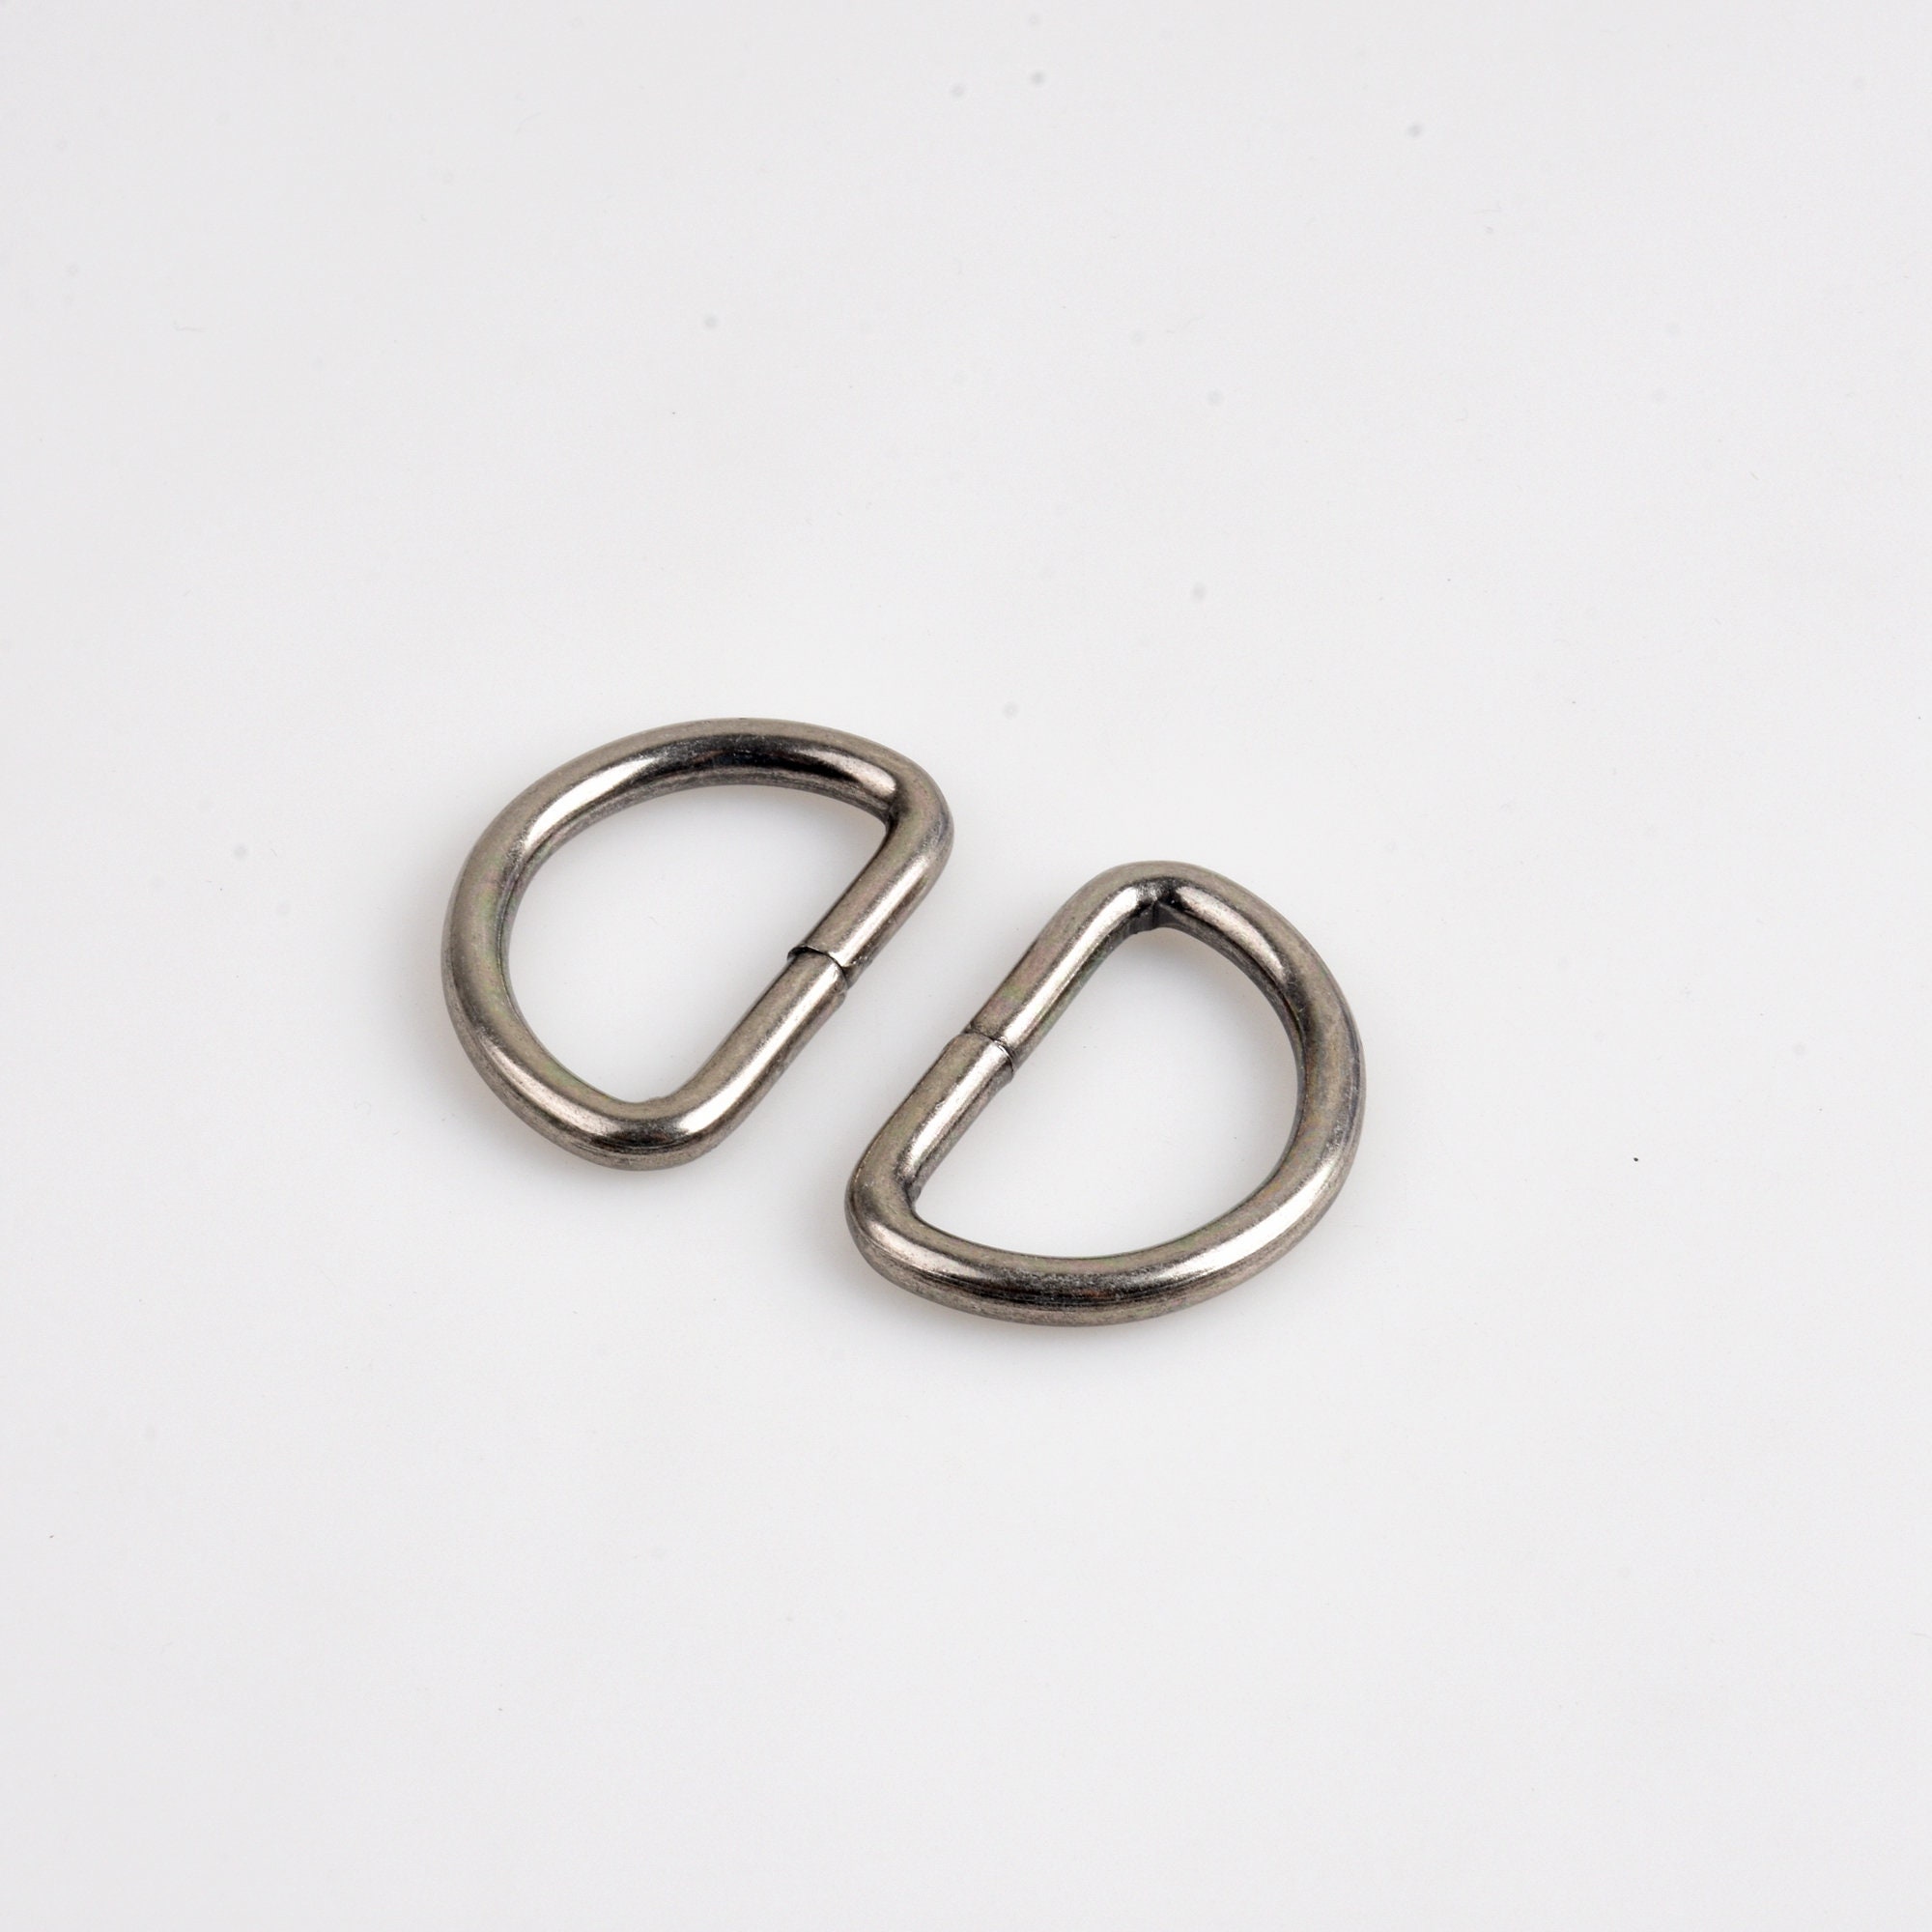 Small D Ring Metal D Ring Bronze Heavy Duty 1/2 Inch Nickel Plated D-rings  for Bags Purse Strap Connector Non Welded-100pcs 